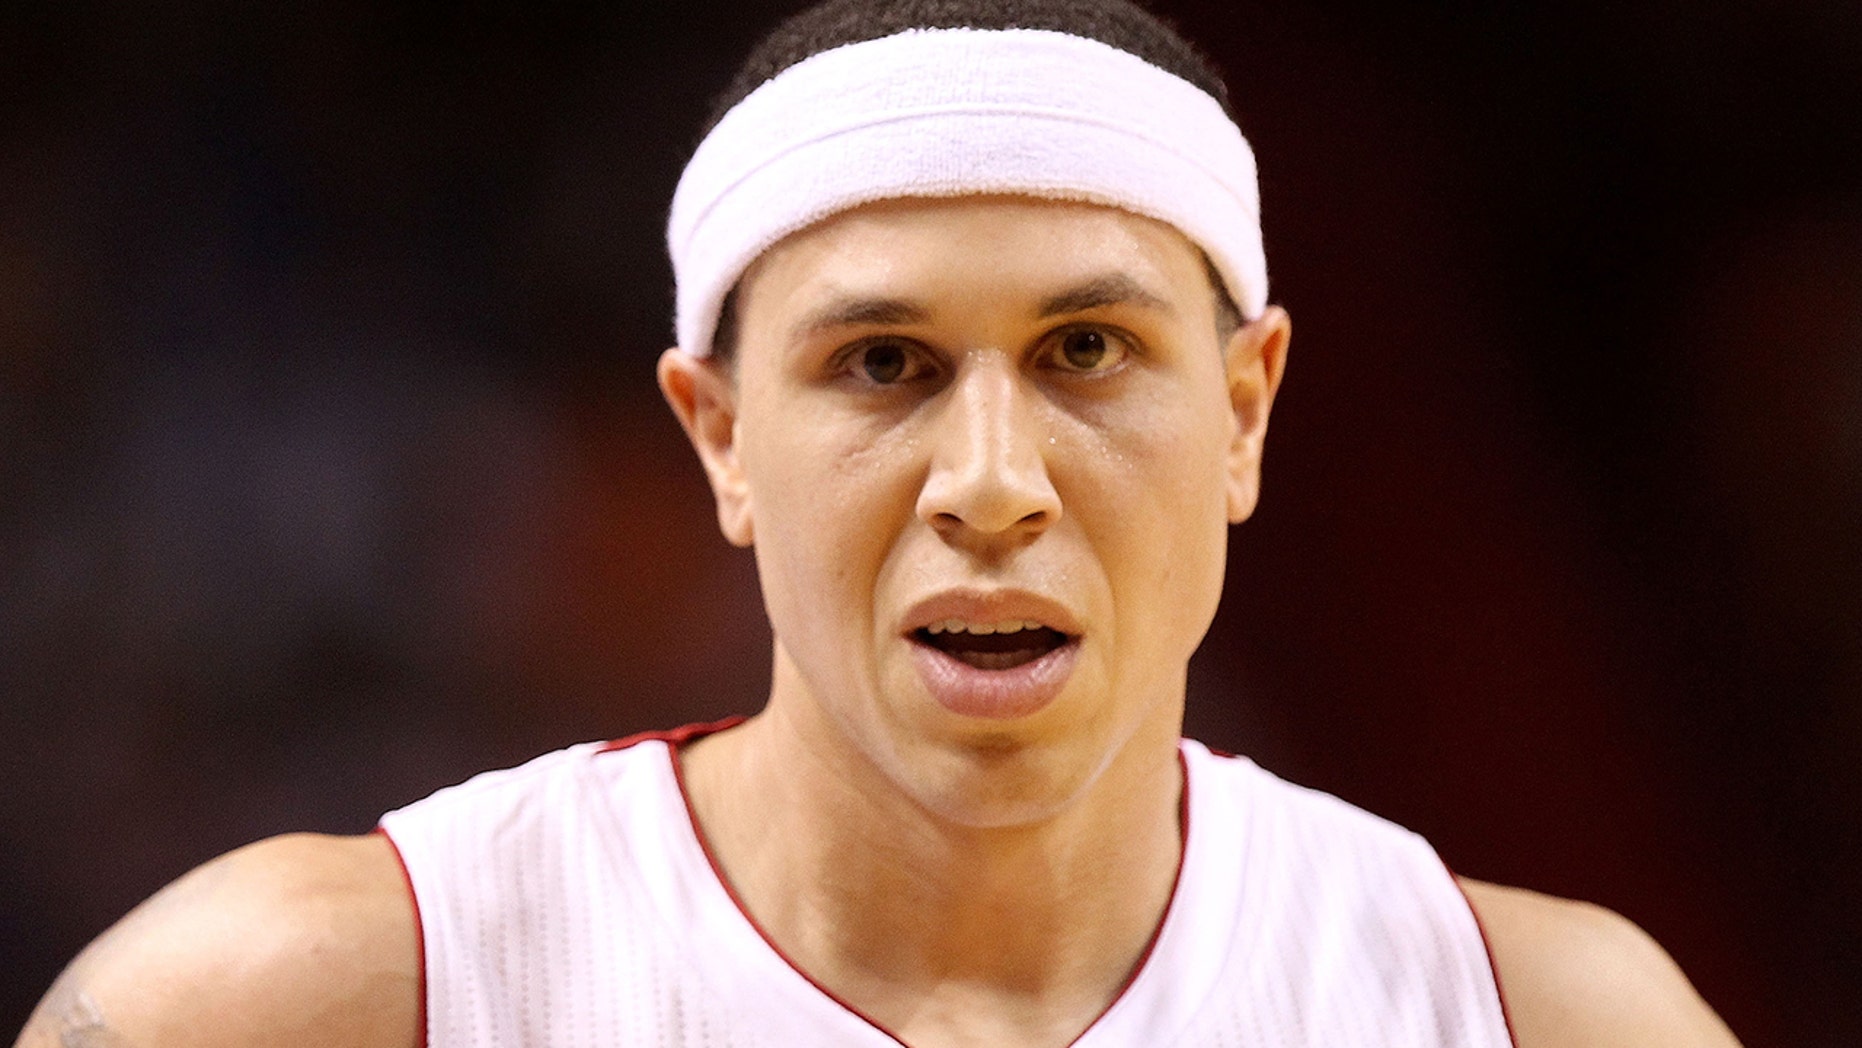 FEATURE 2011: Mike Bibby of the Miami Heat attends a match against the Orlando Magic at the American Airlines Arena in Miami, Florida. (Photo by Mike Ehrmann / Getty Images)